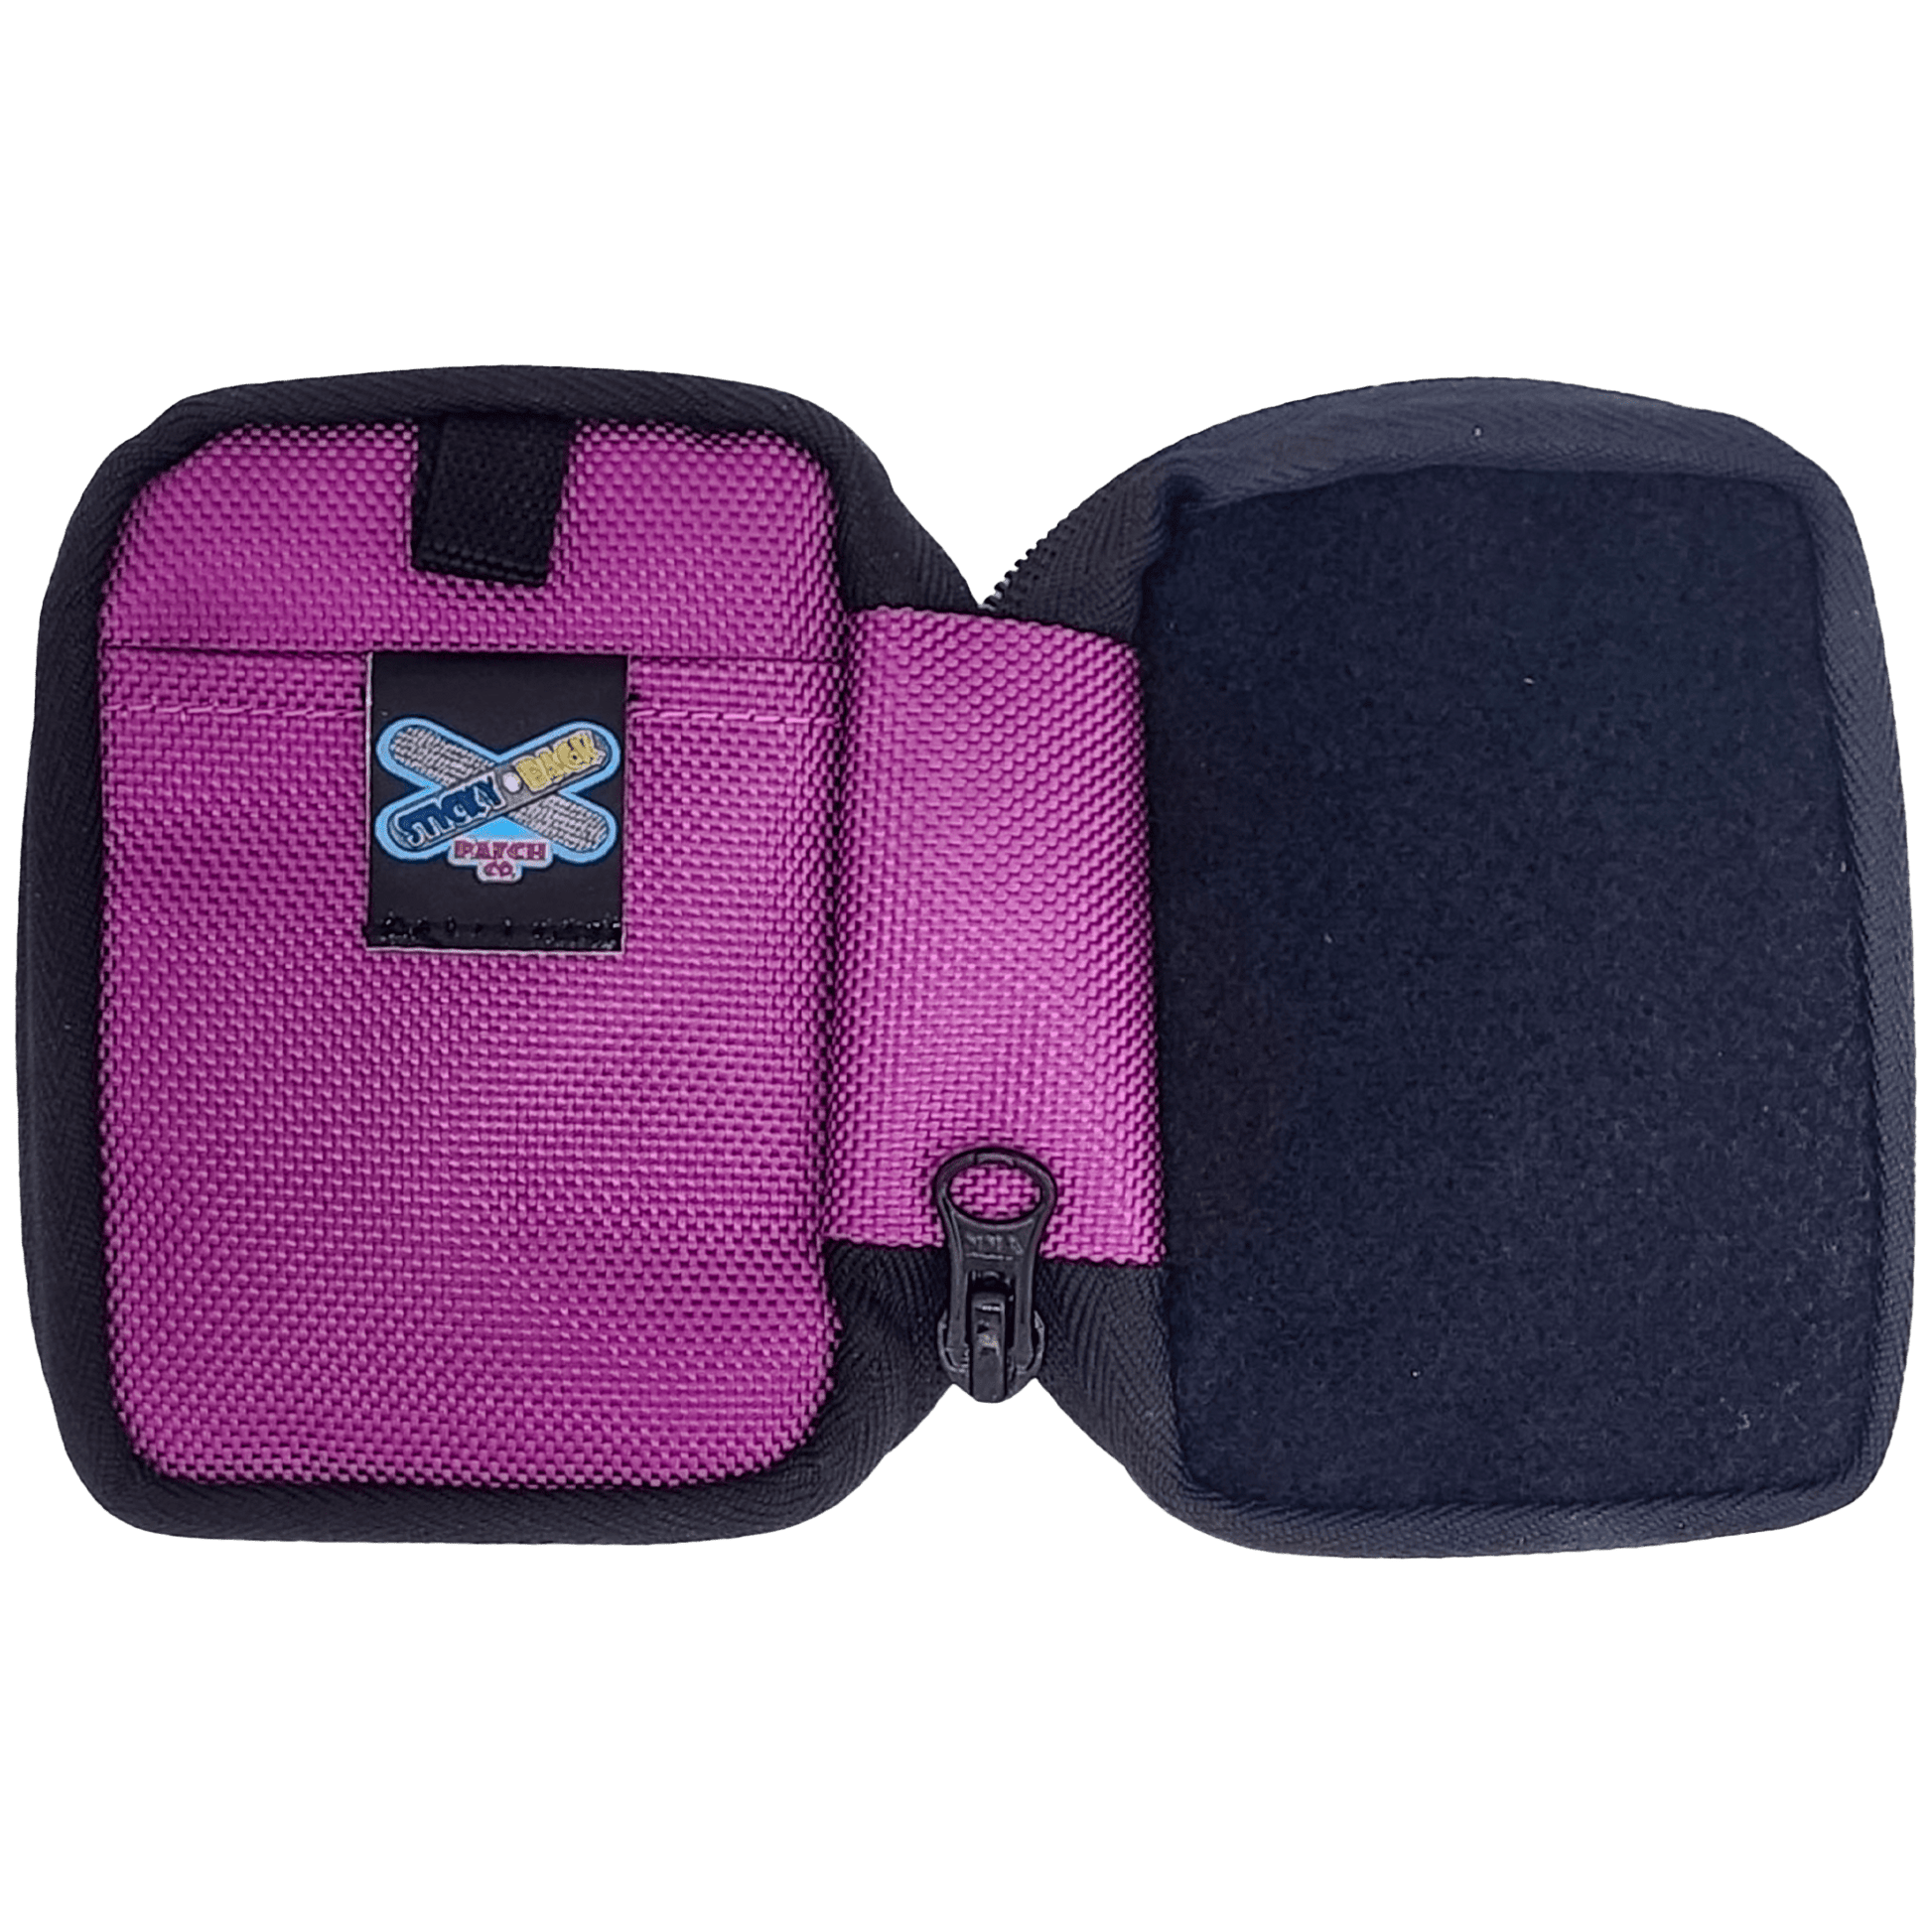 Back side of purple Micro Pouch with a logo patch and empty compartments.